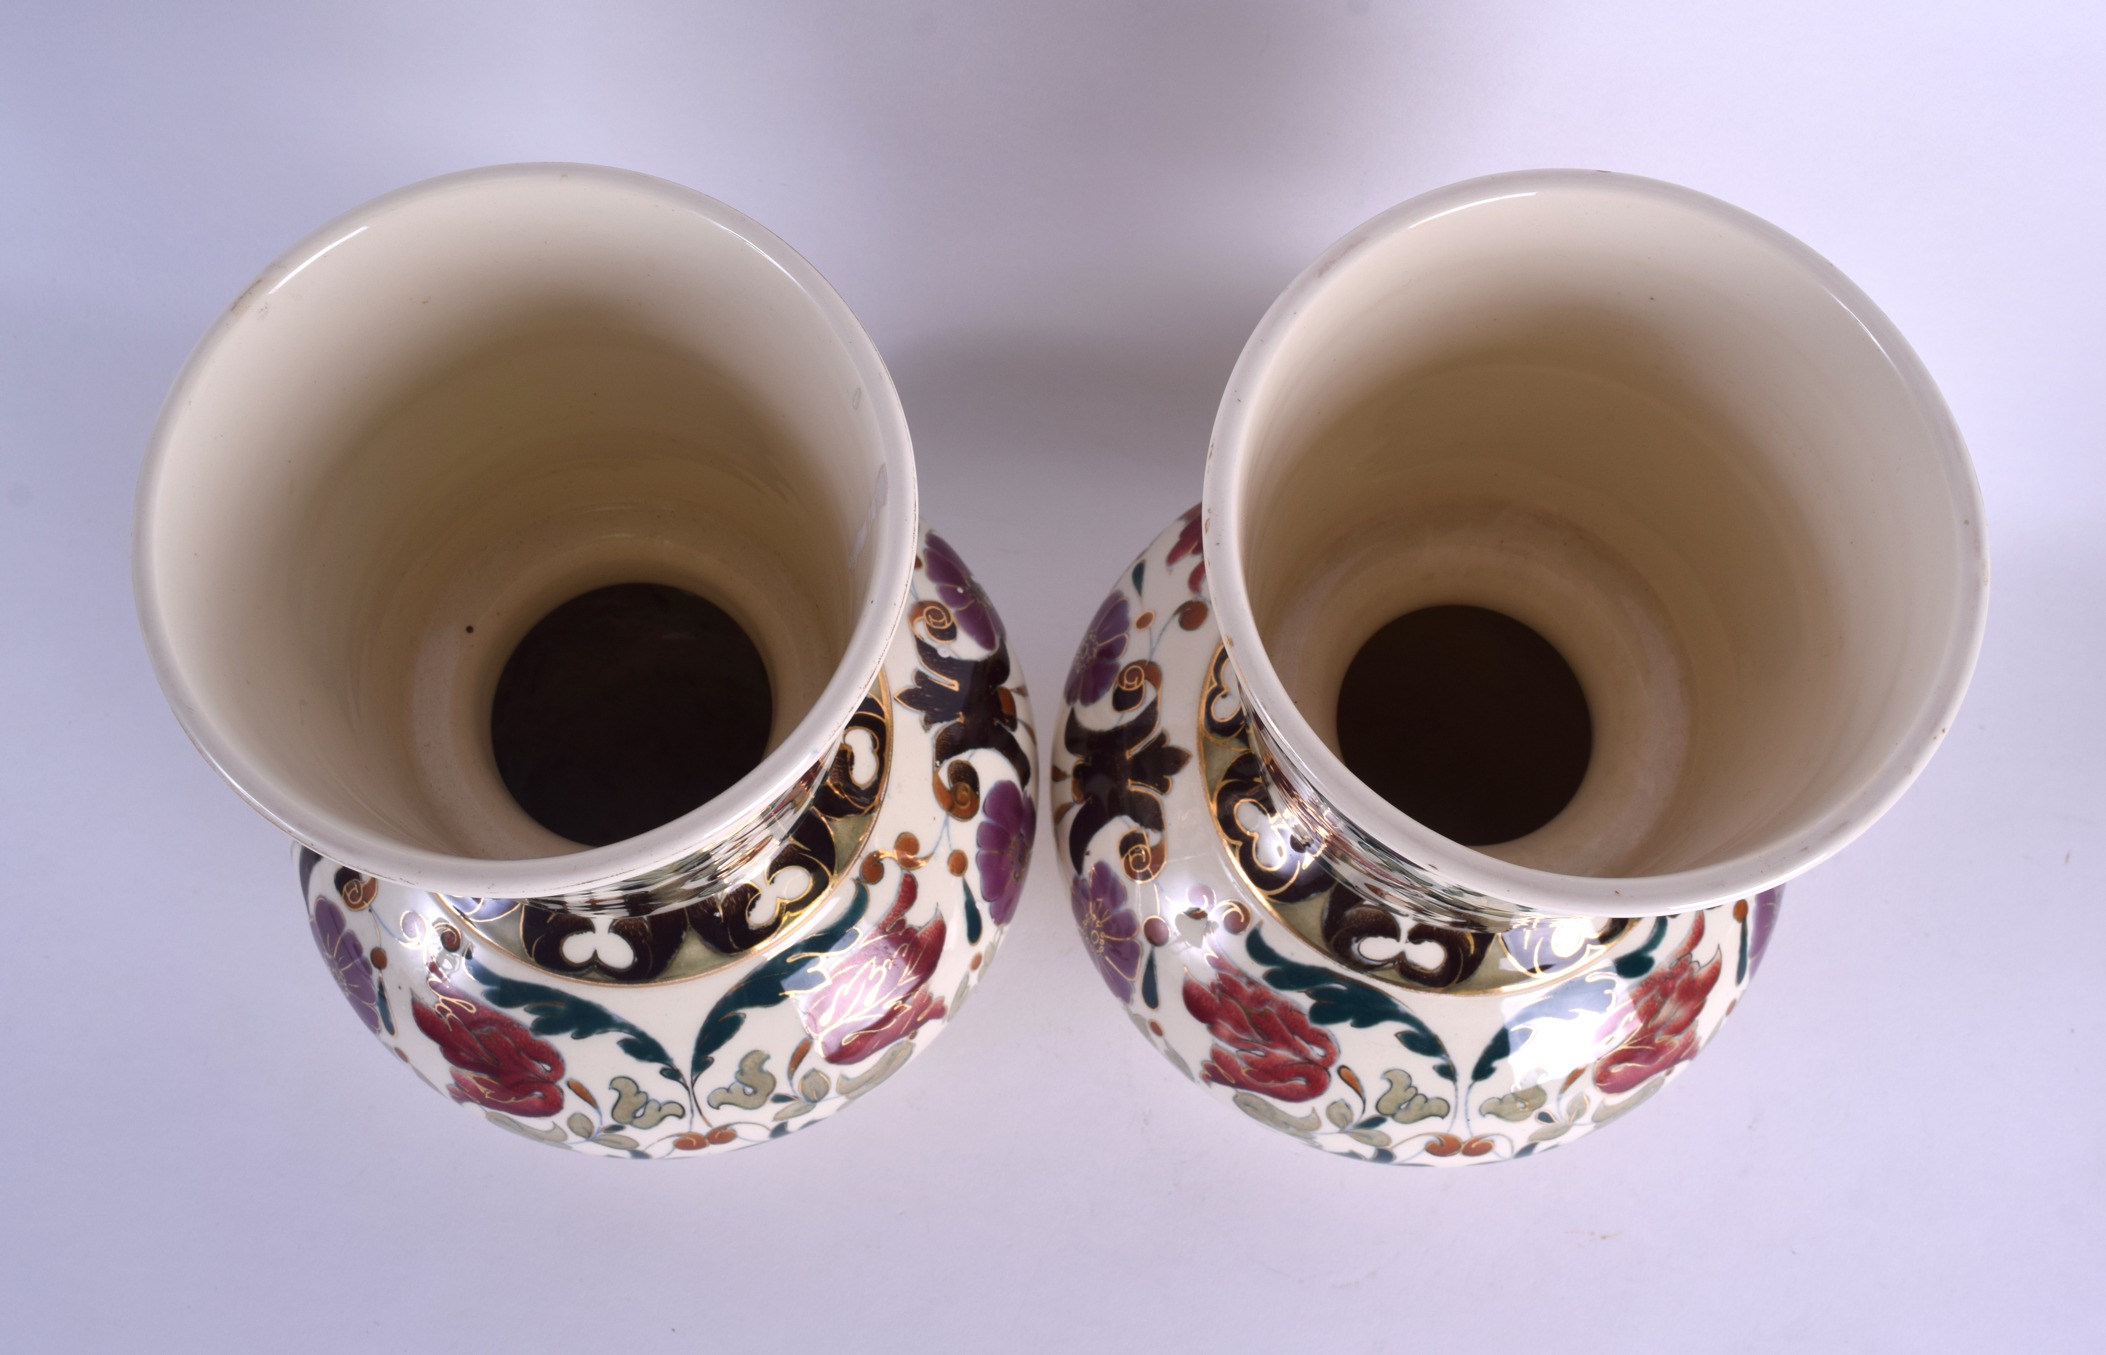 A PAIR OF AUSTRO HUNGARIAN RUDOLF DITMAR VASES Zsolnay style, painted with flowers. 25 cm high. - Image 3 of 4